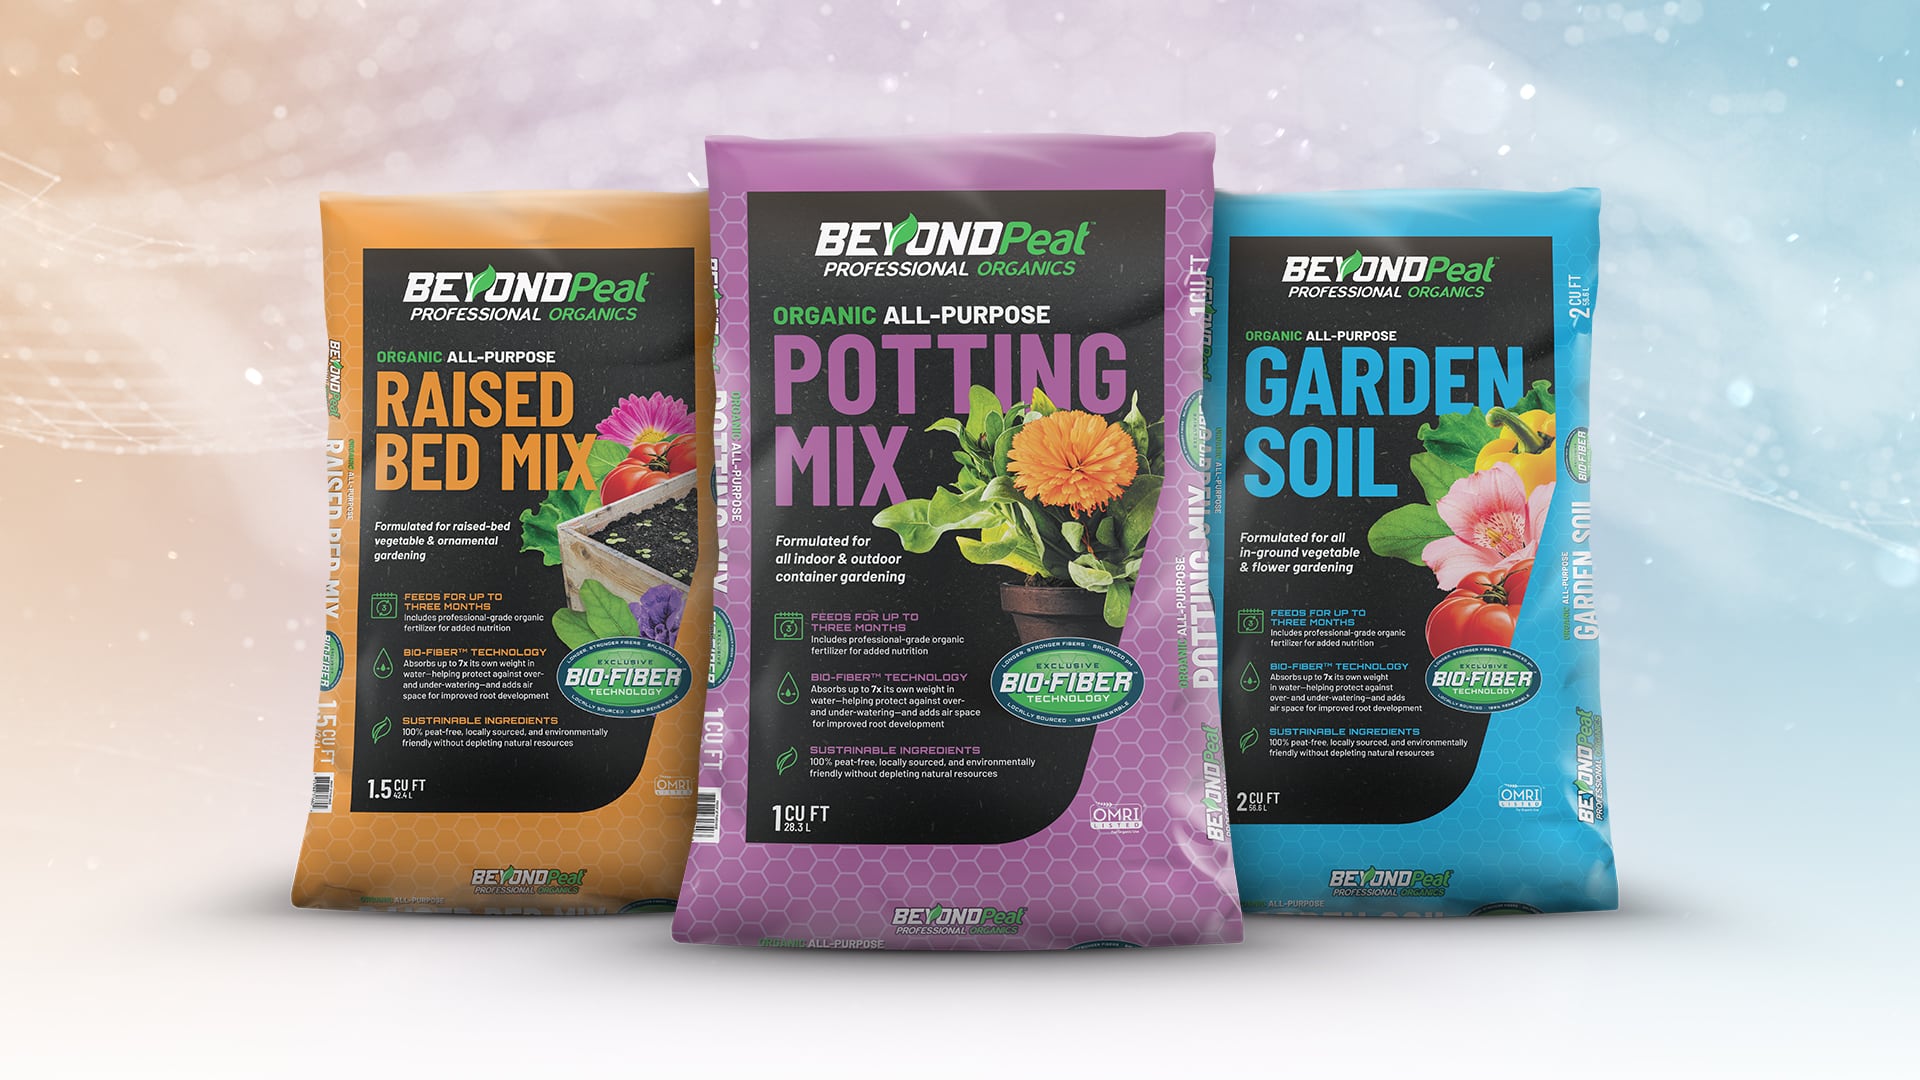 Beyond Peat Products